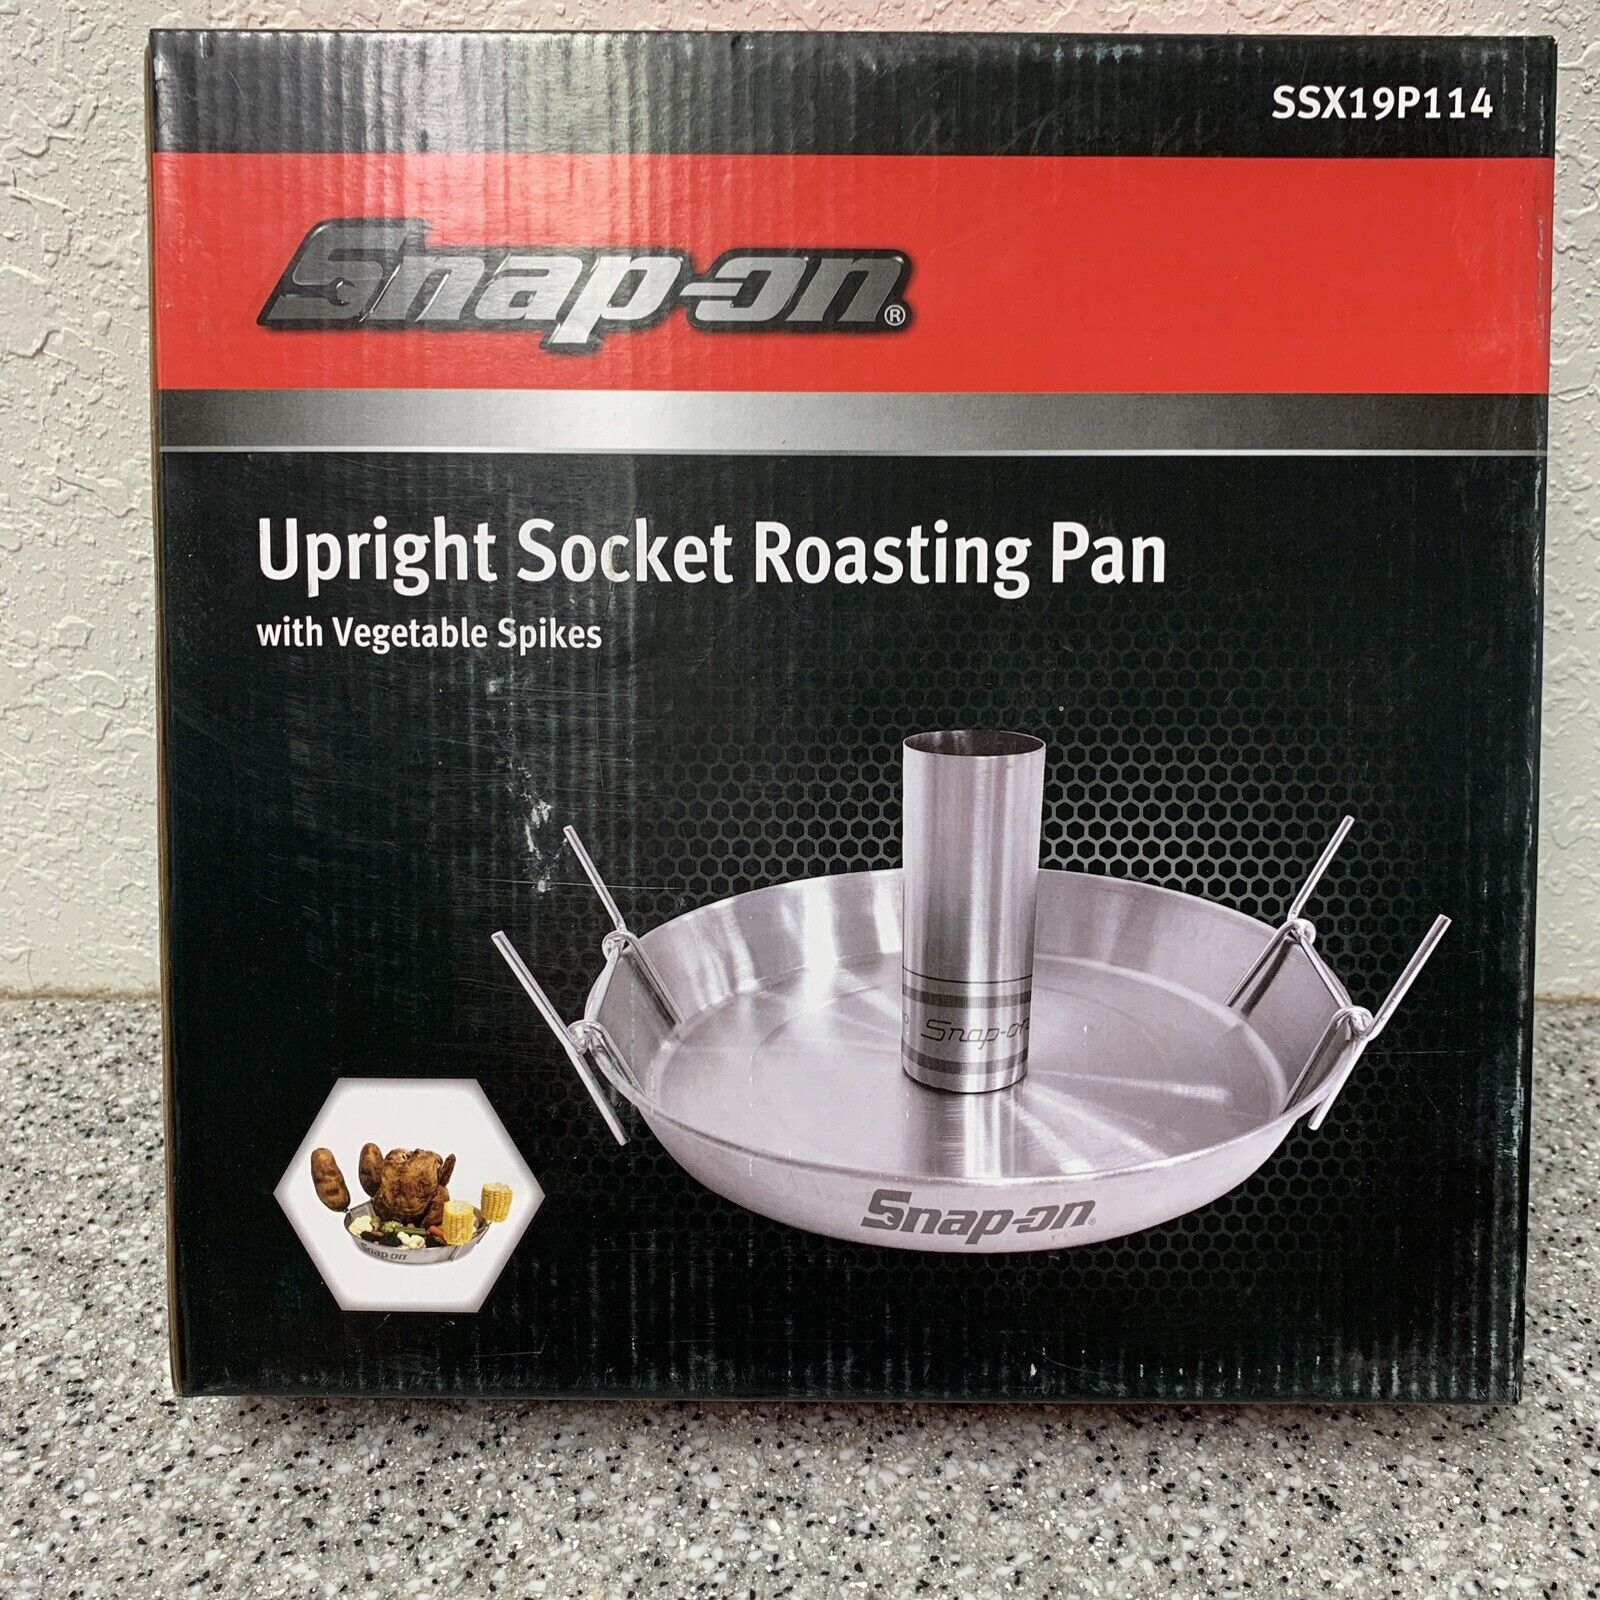 NEW Snap-on Tools Upright Socket Beer Can Chicken Roasting Pan With Veg Spikes